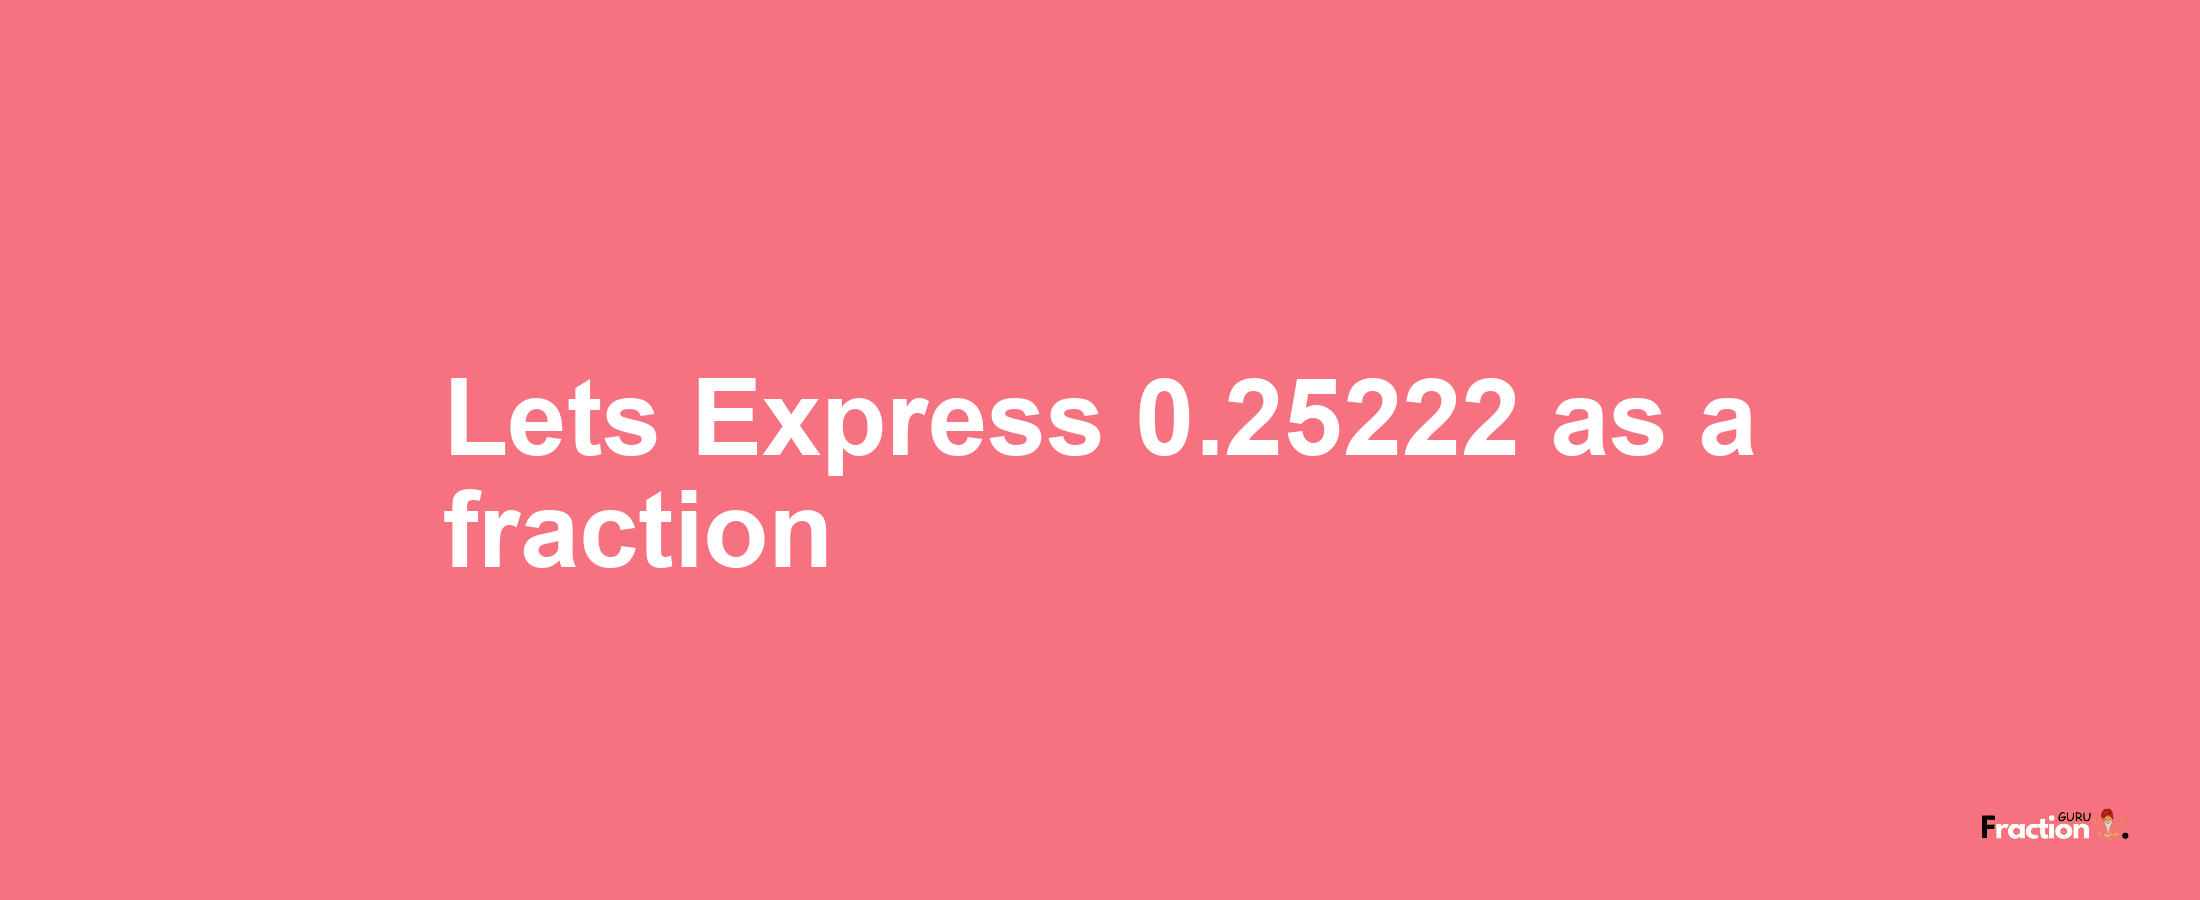 Lets Express 0.25222 as afraction